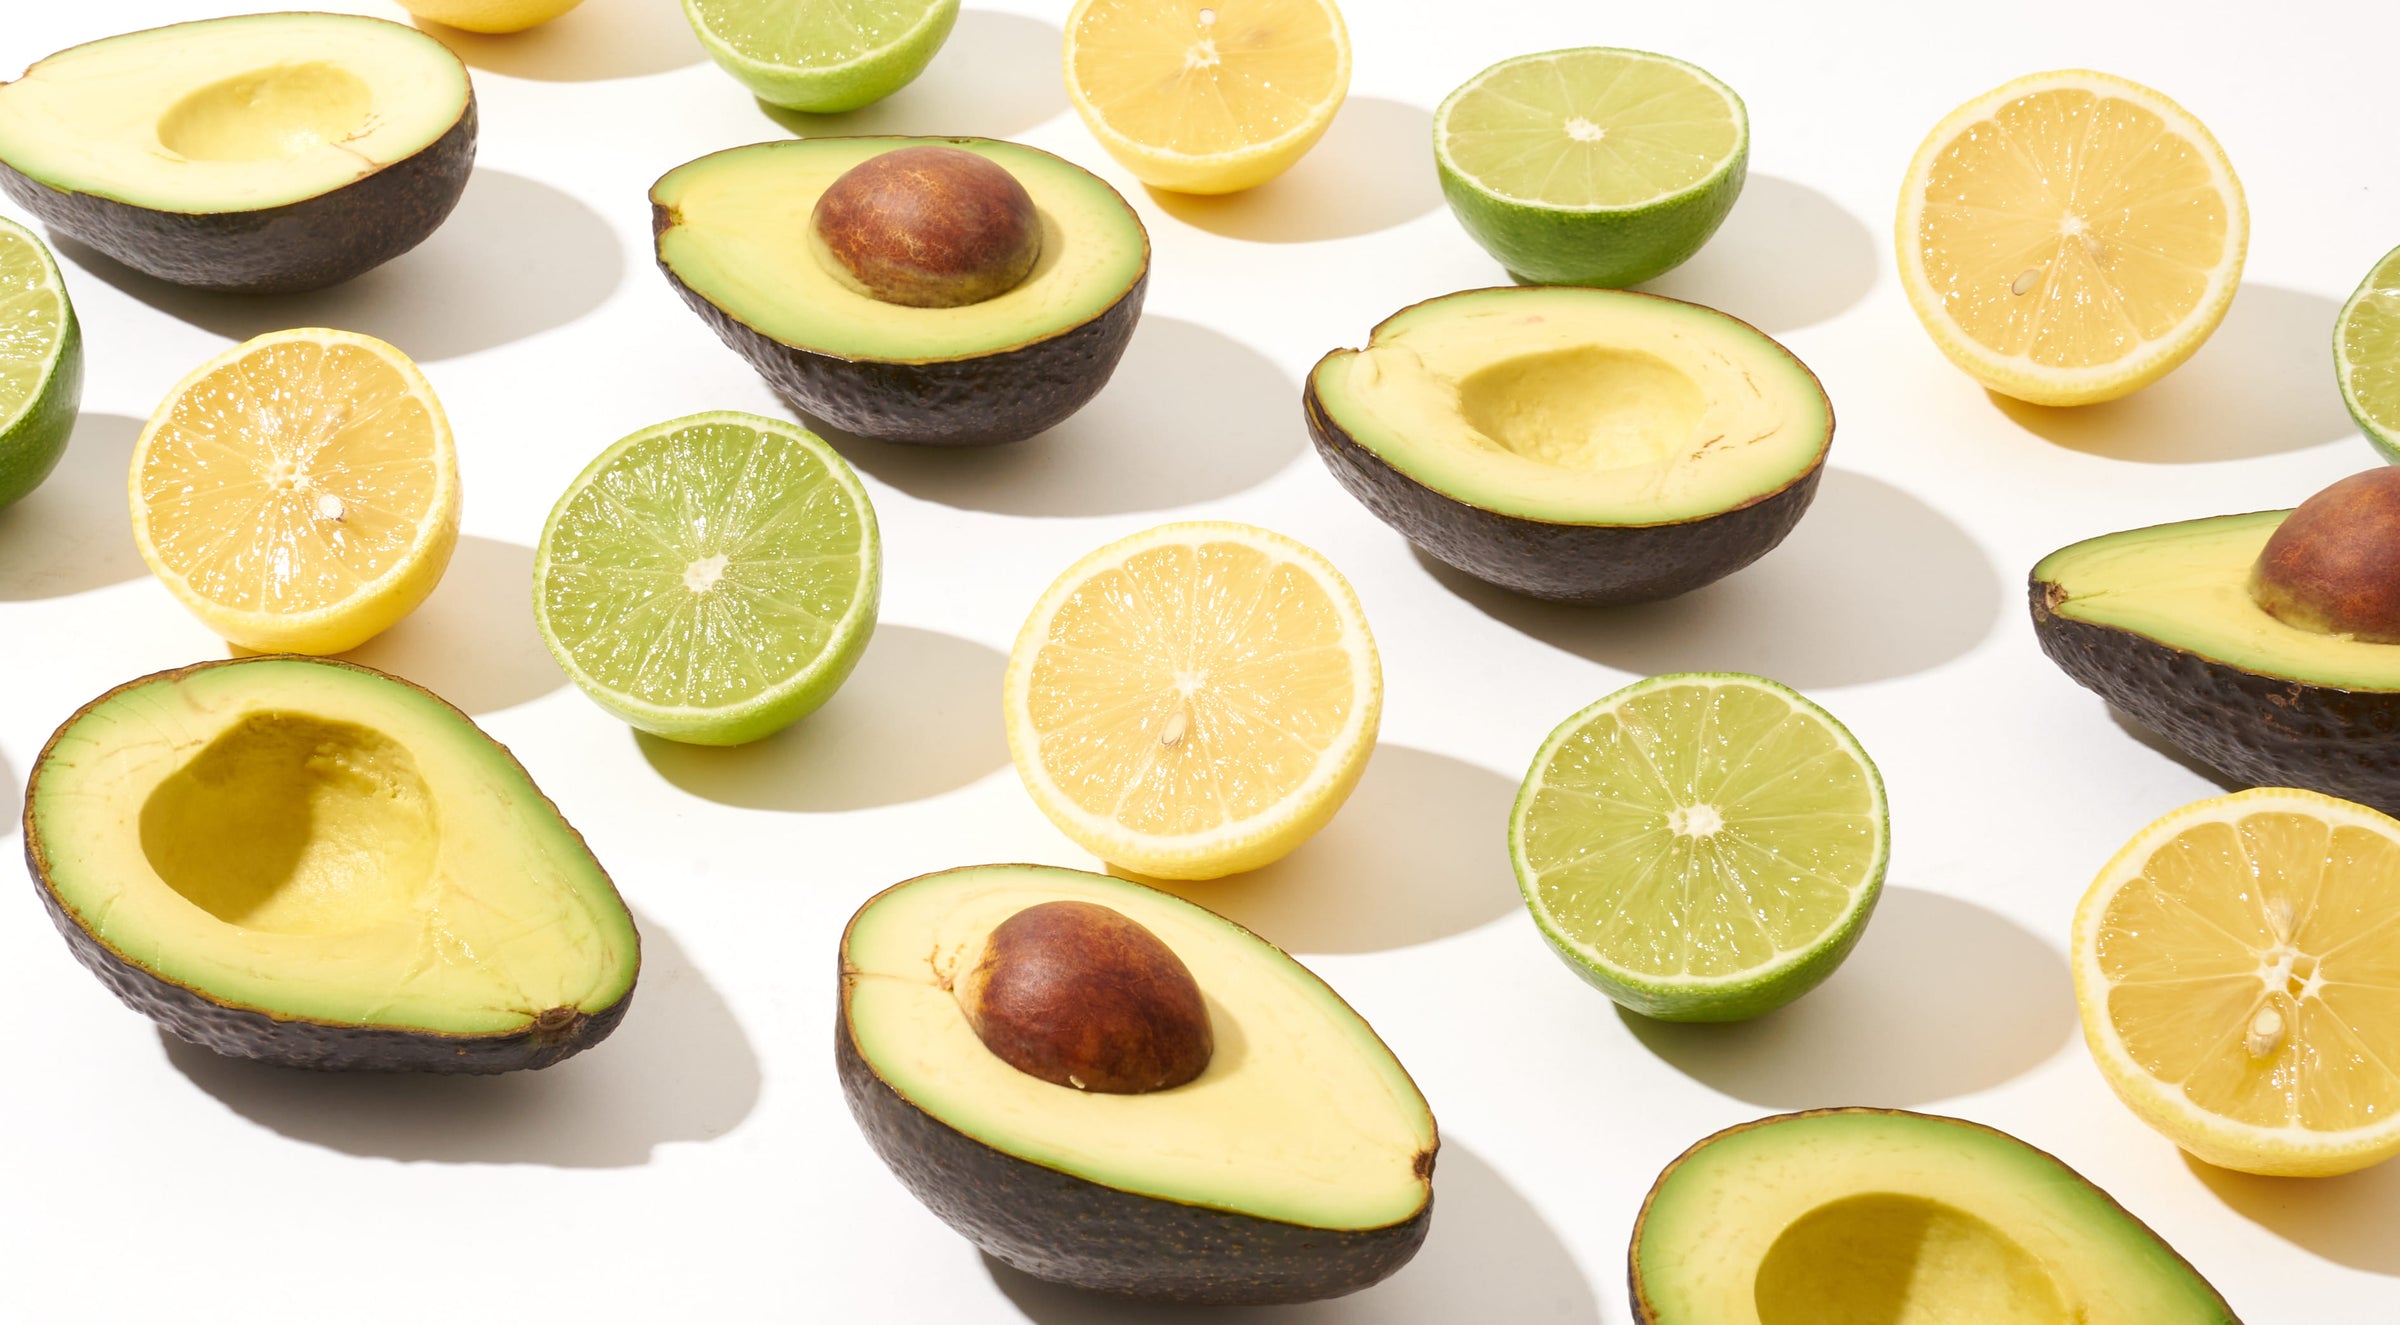 Fresh Avocados, limes and lemons cut open and line up in 4 rows on a white background